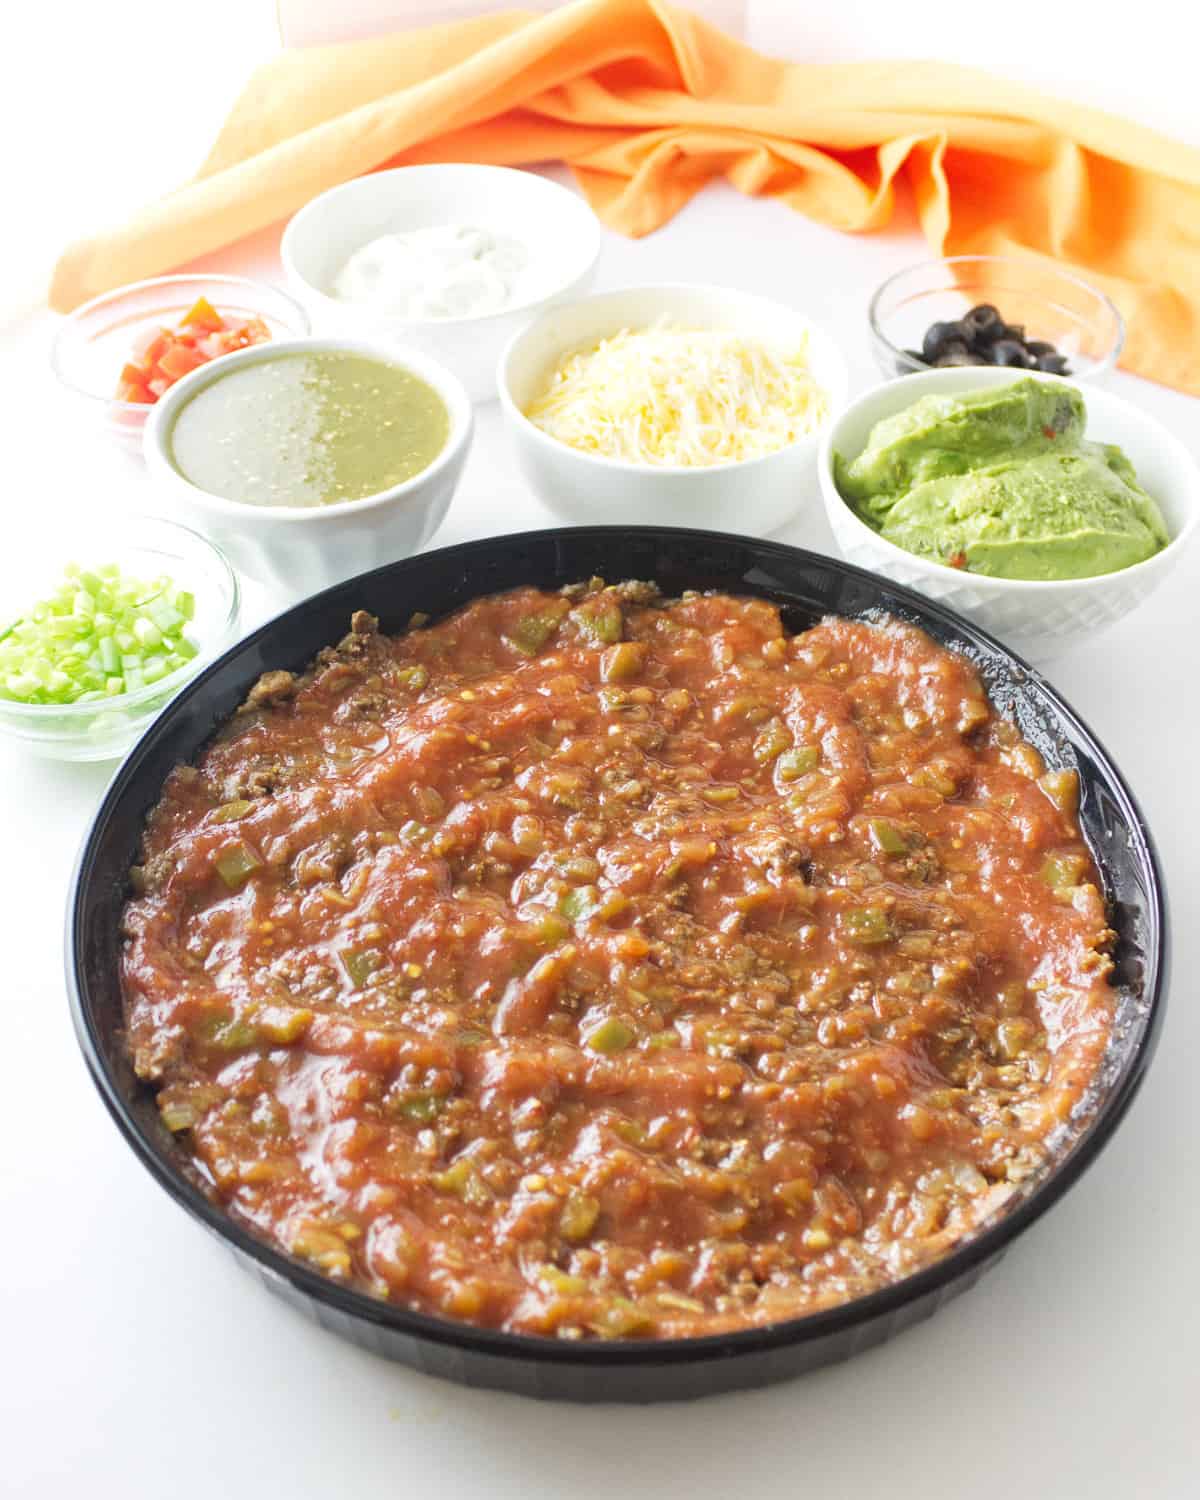 salsa spread out in a dish.